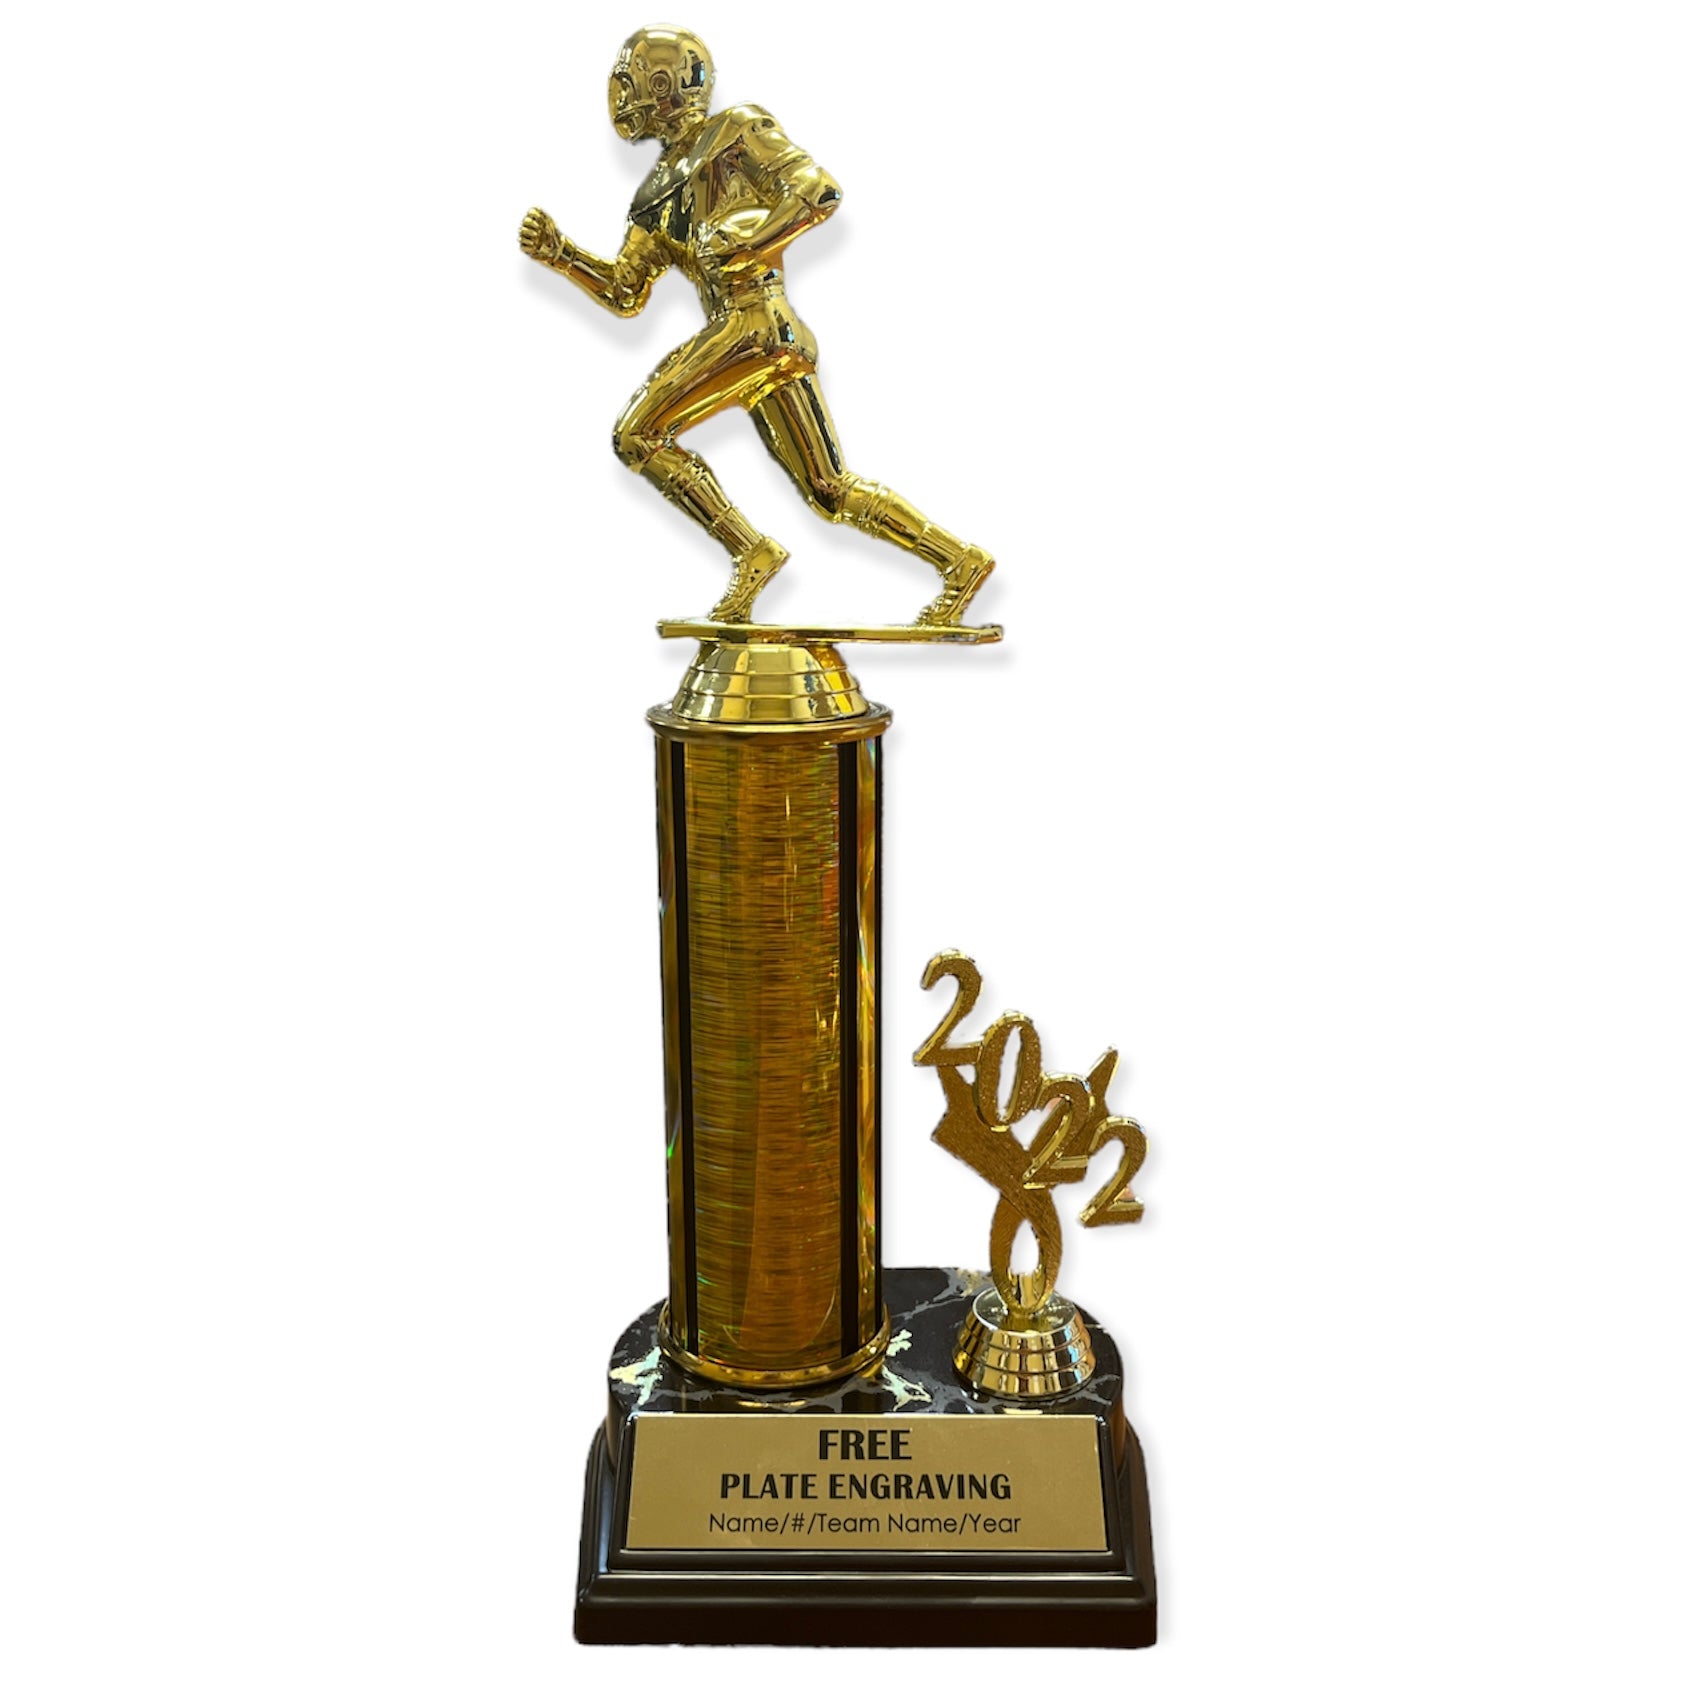 football trophy with free engraved plate and date figure